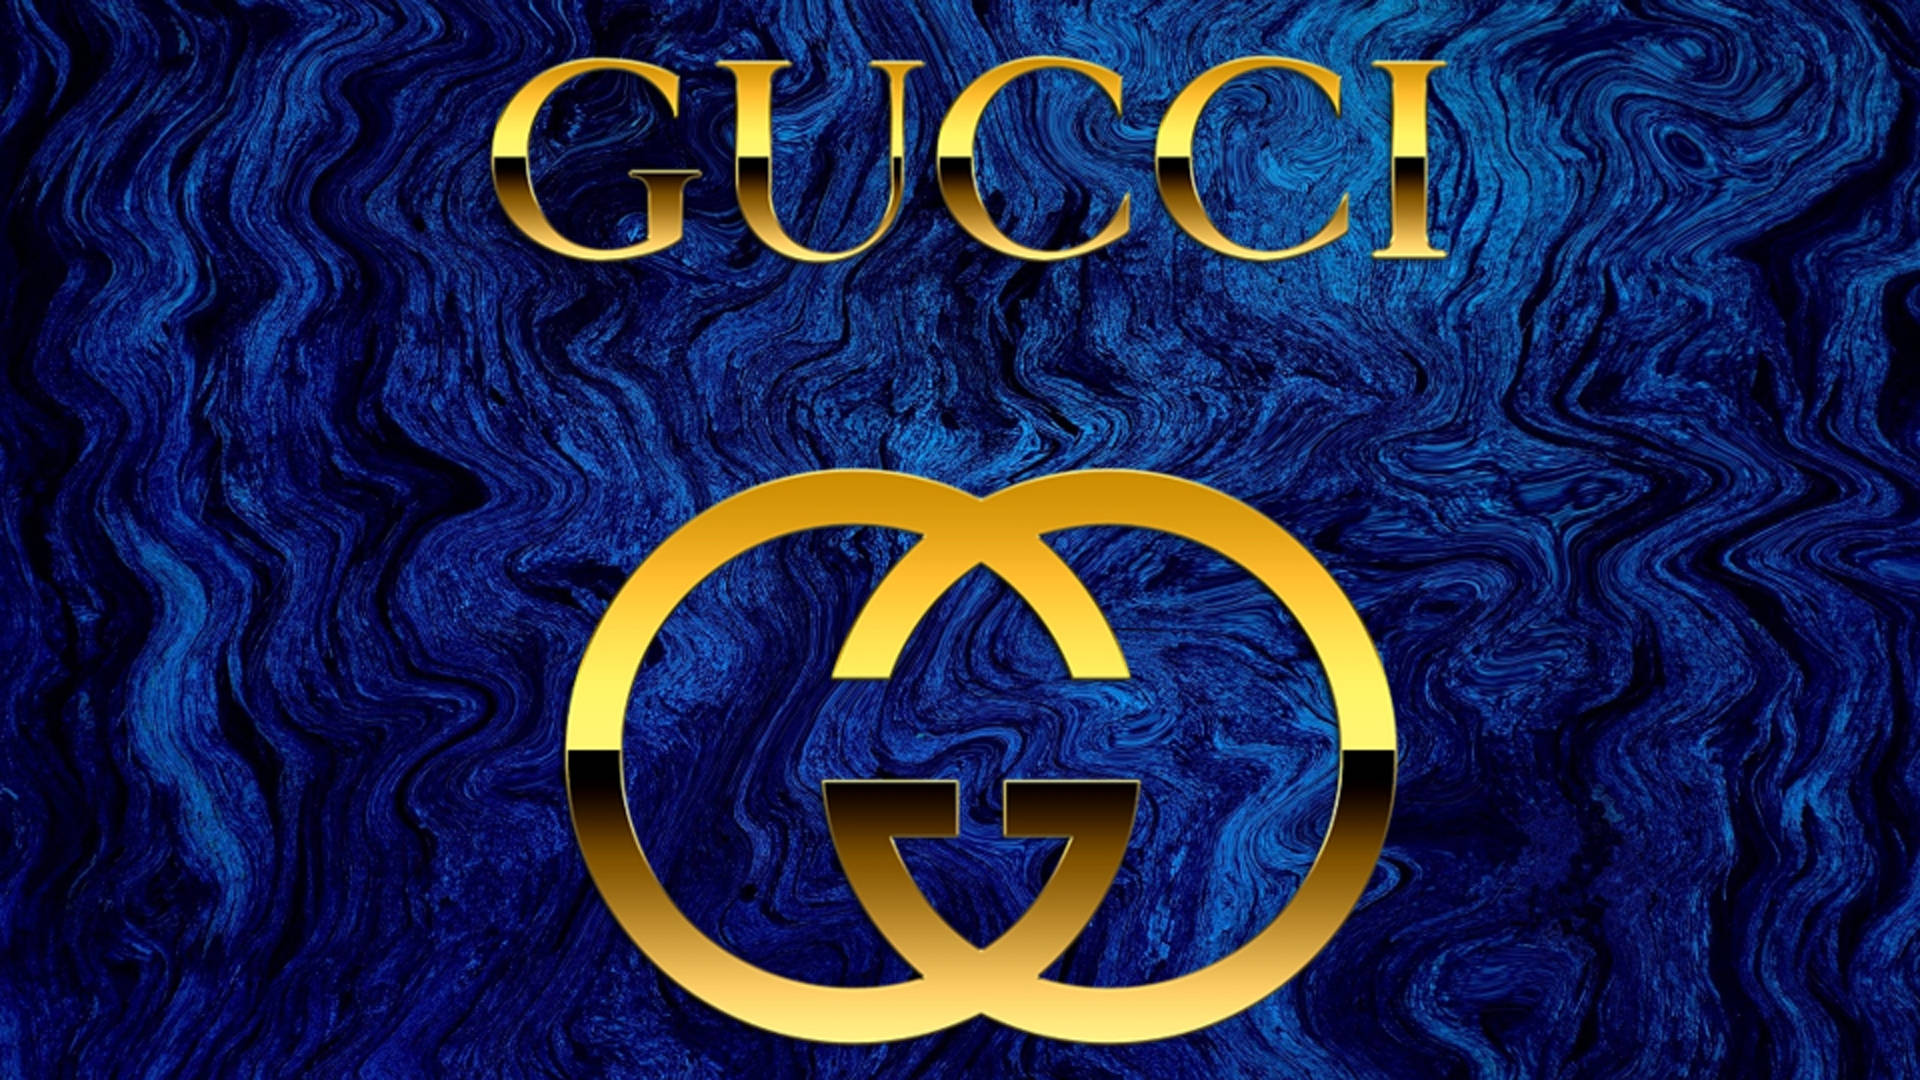 Gucci 1920X1080 Wallpaper and Background Image